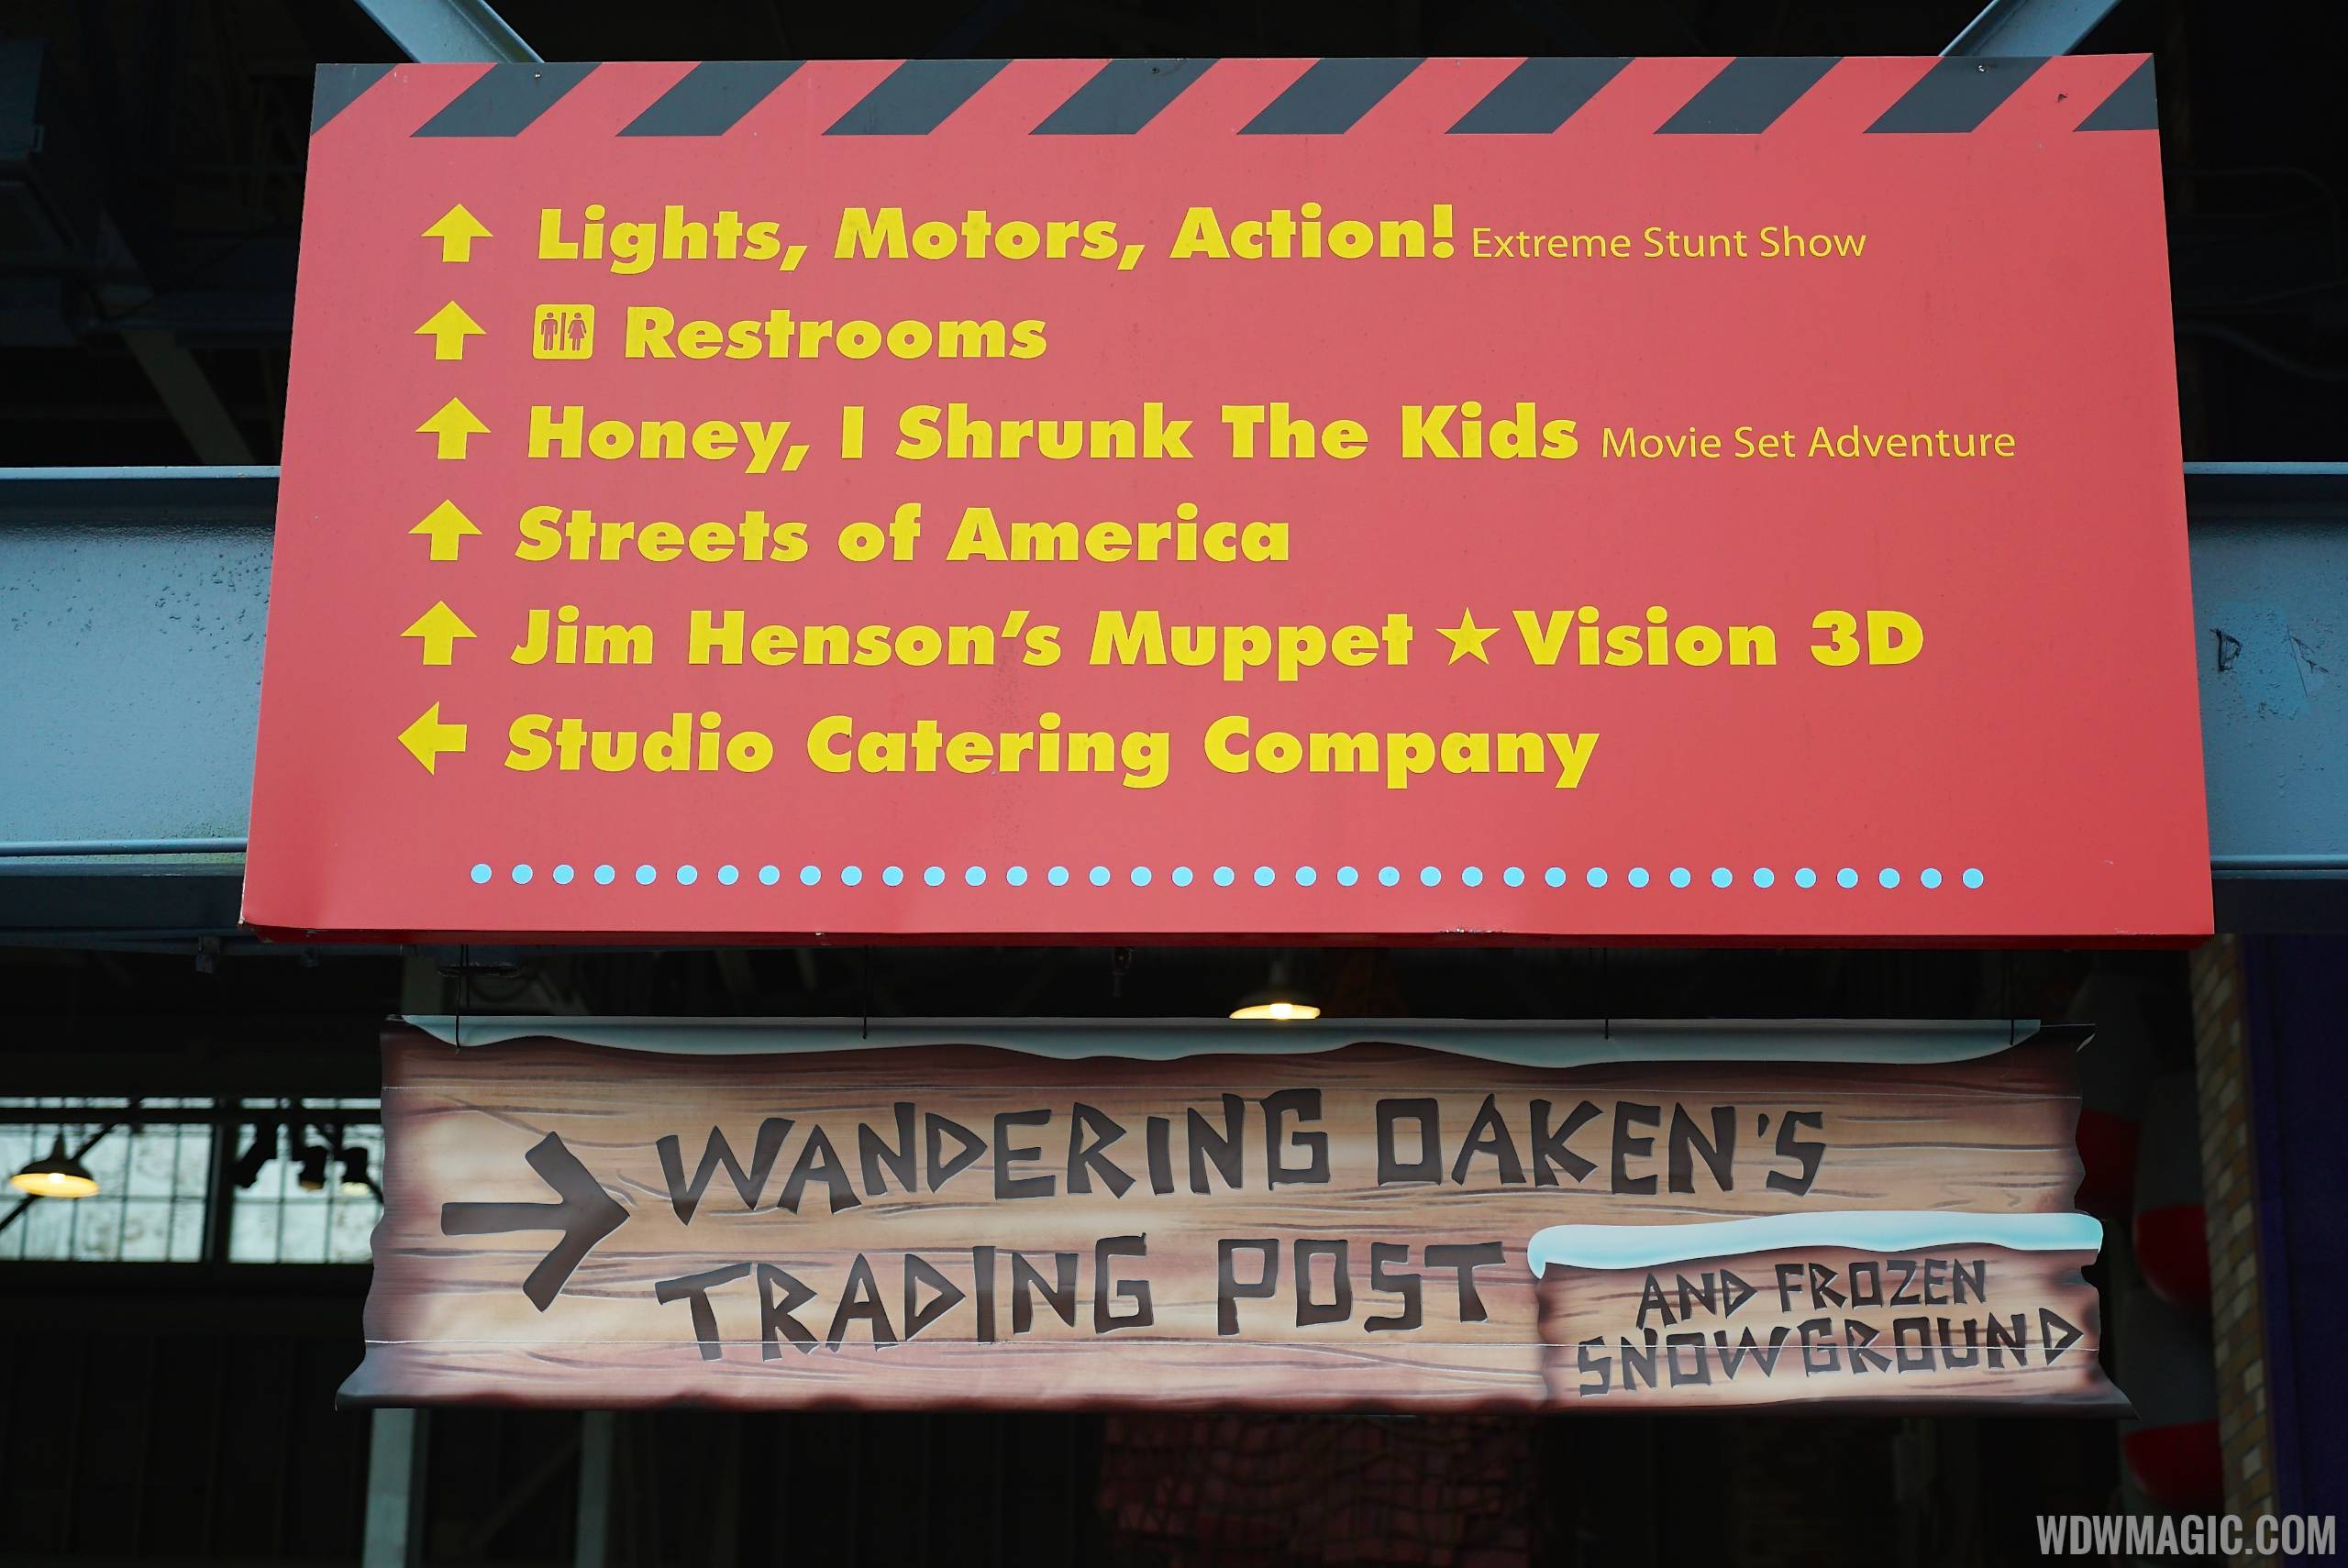 PHOTOS - New Wandering Oakens Trading Post and Frozen Snowground opens on Streets of America